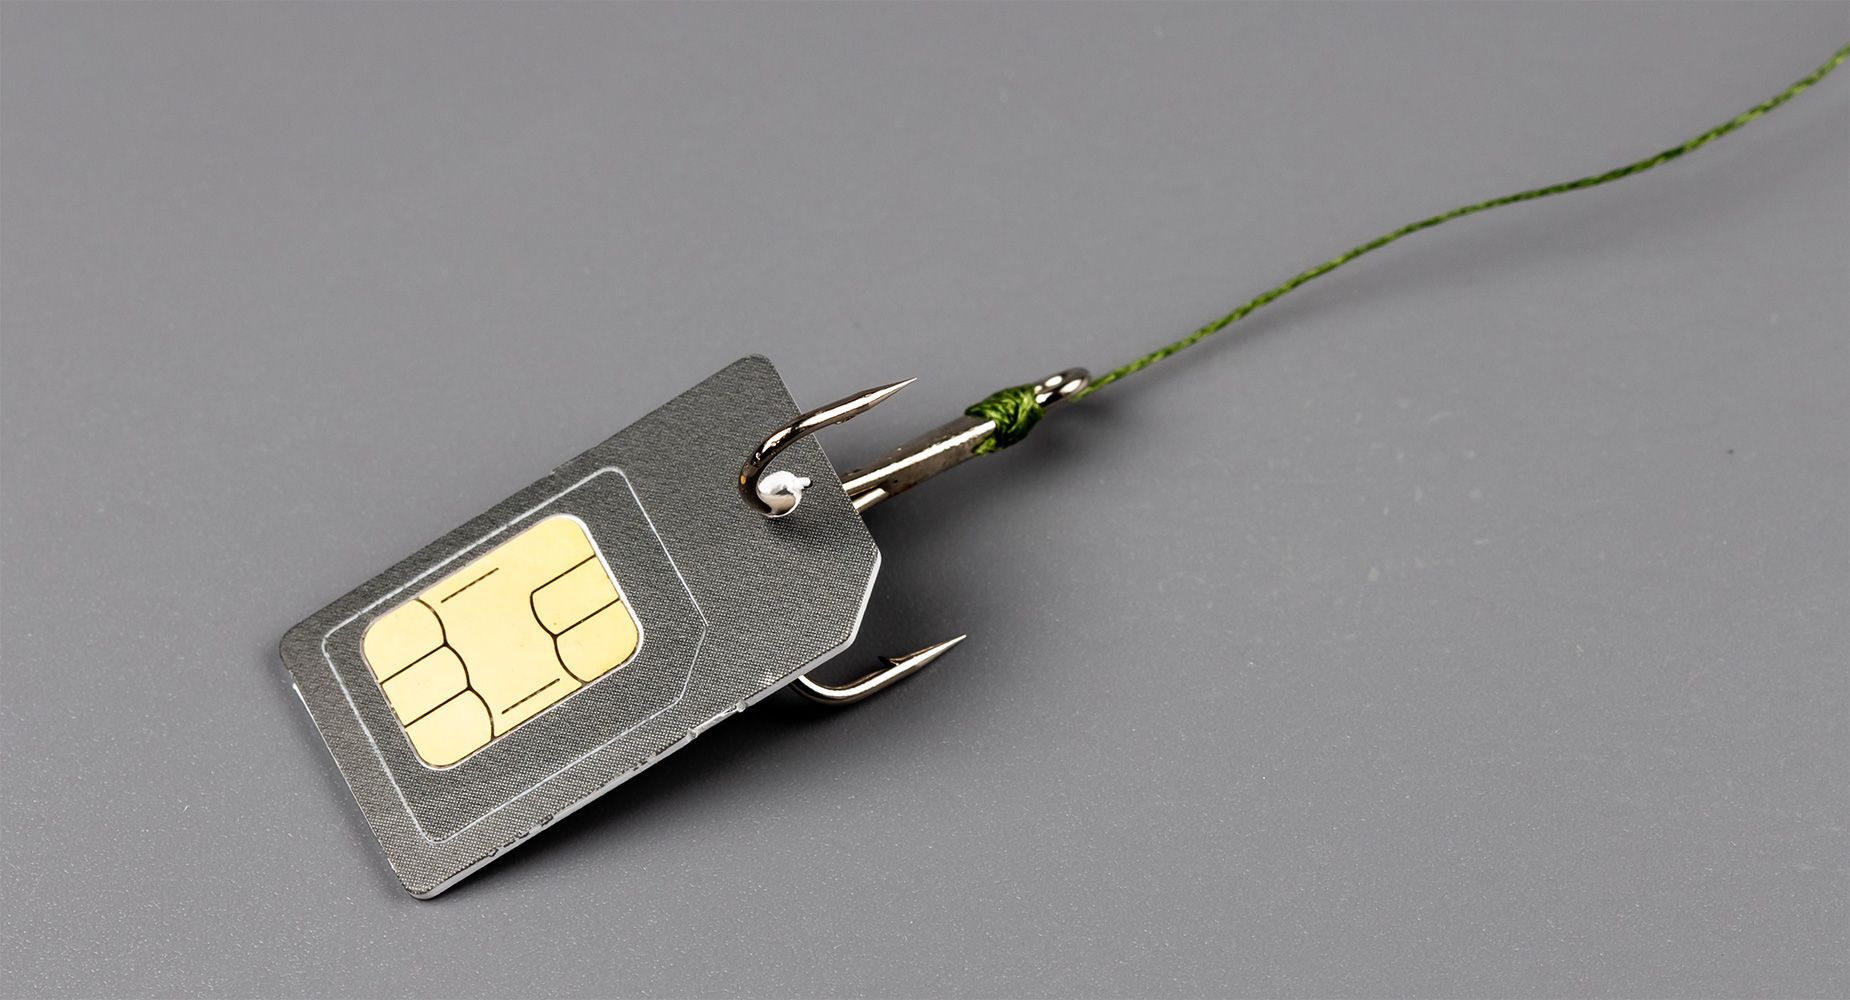 A SIM card attached to a fishing hook. 